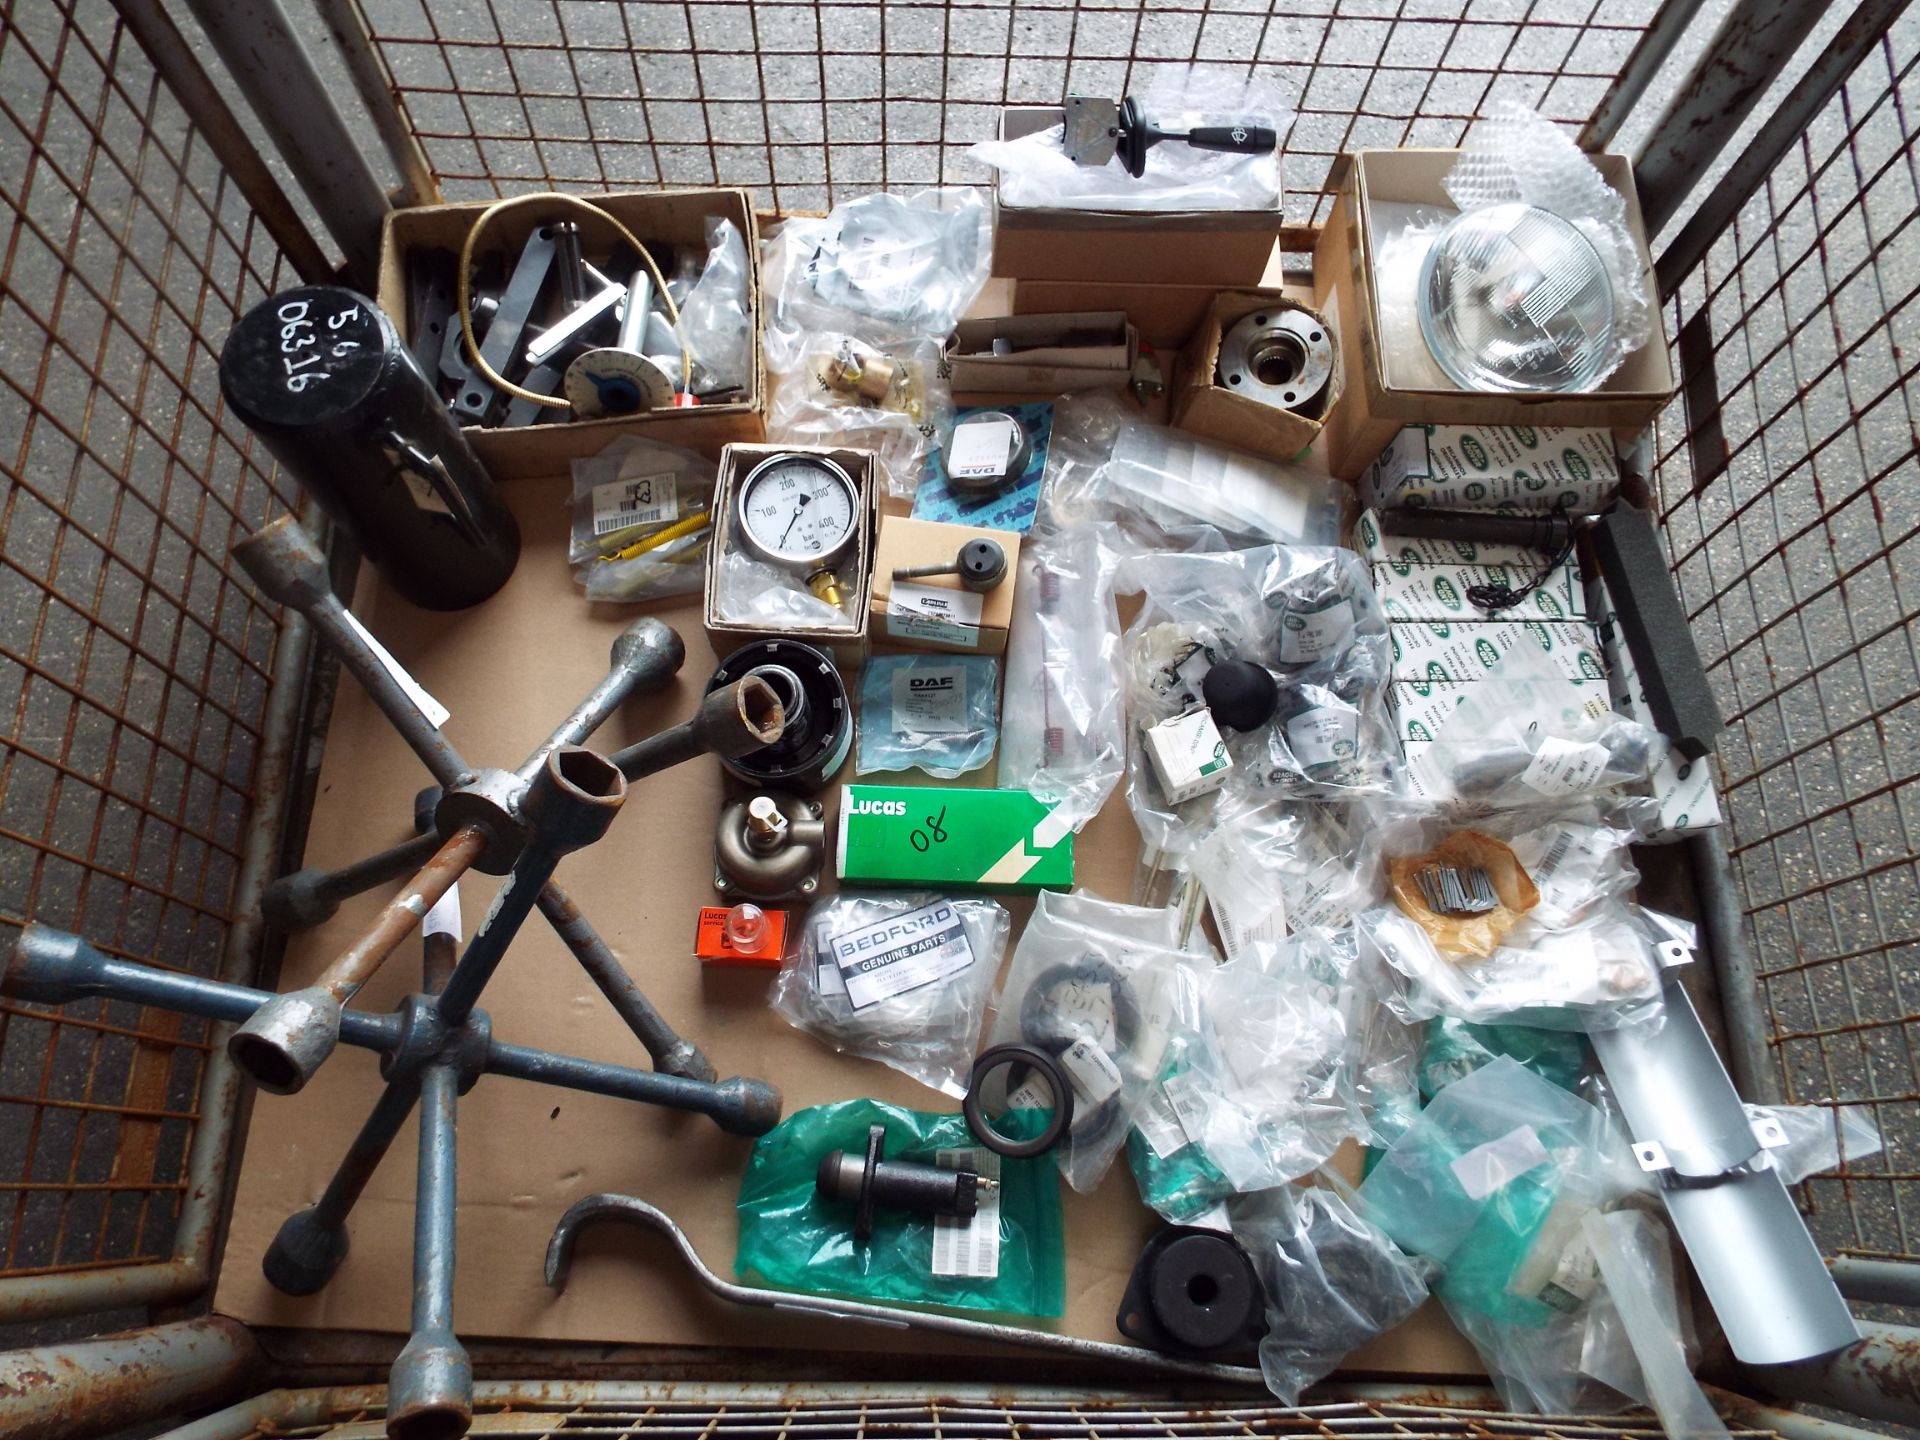 Mixed Stillage of Tools, Land Rover and Truck Parts inc Spanners, Pins, Switches, Cylinders etc